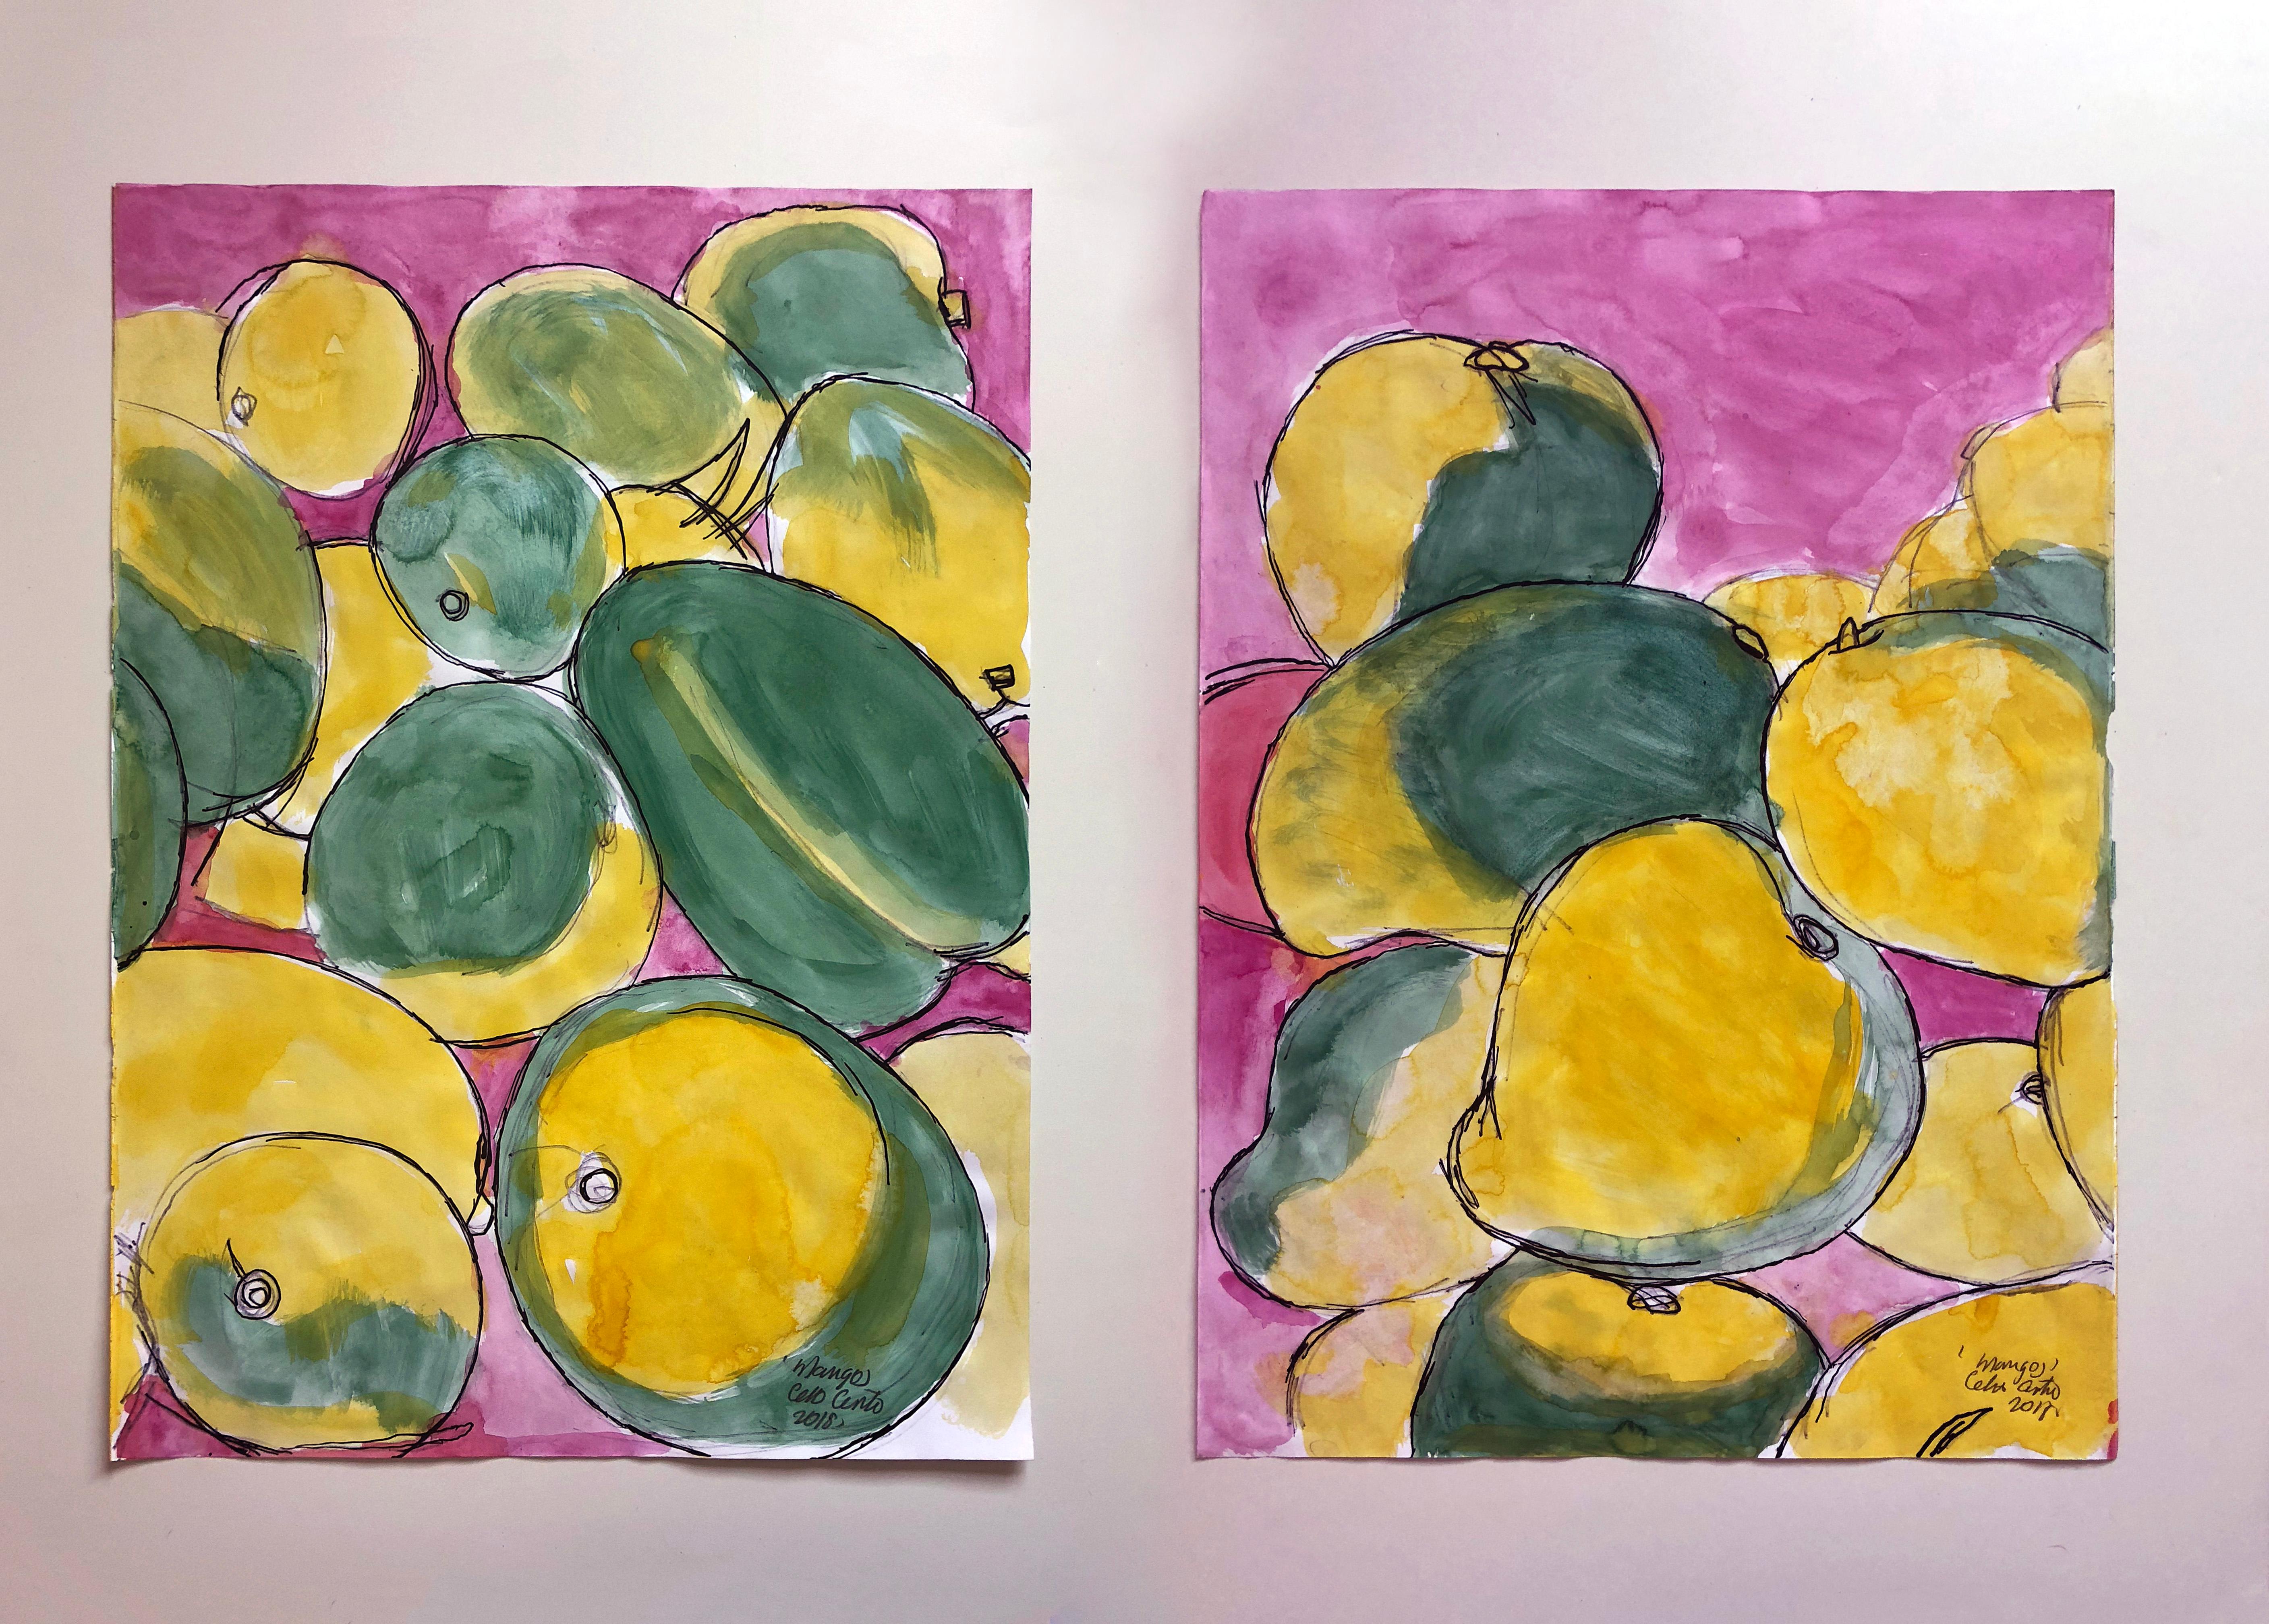 Colombian Mangos (B2), Watercolor and Ink on Archival Paper, Diptych, 2018